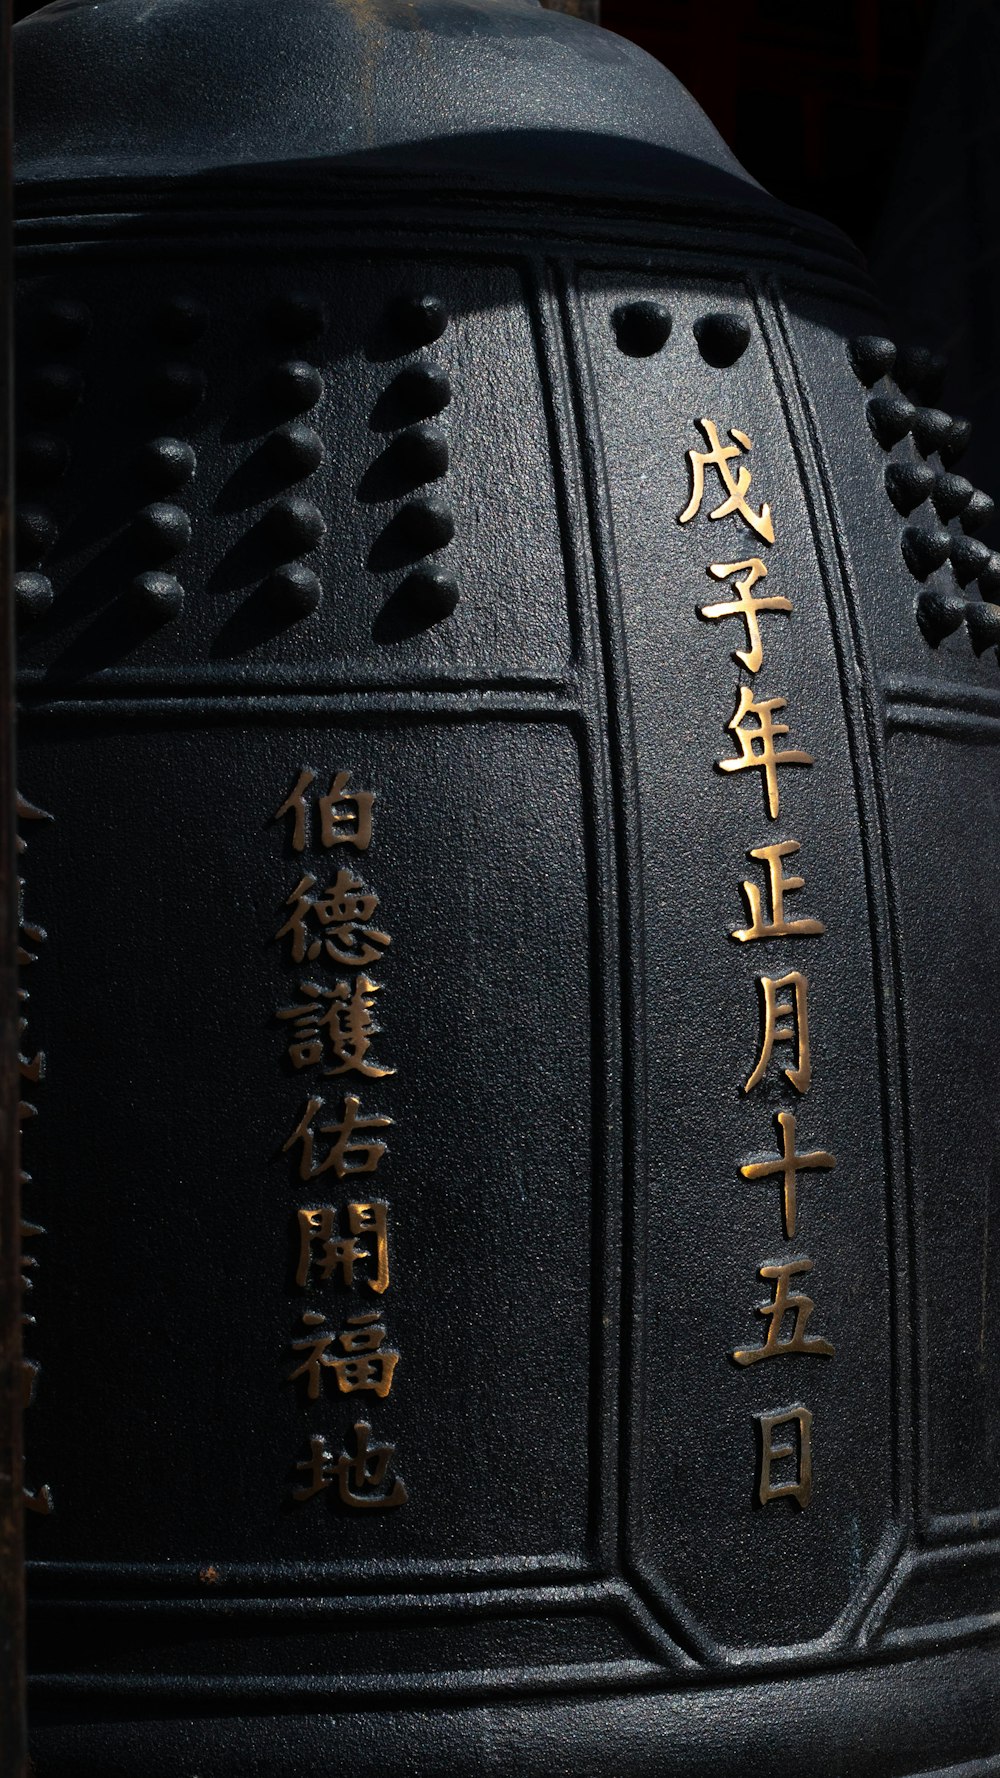 a close up of a black vase with writing on it